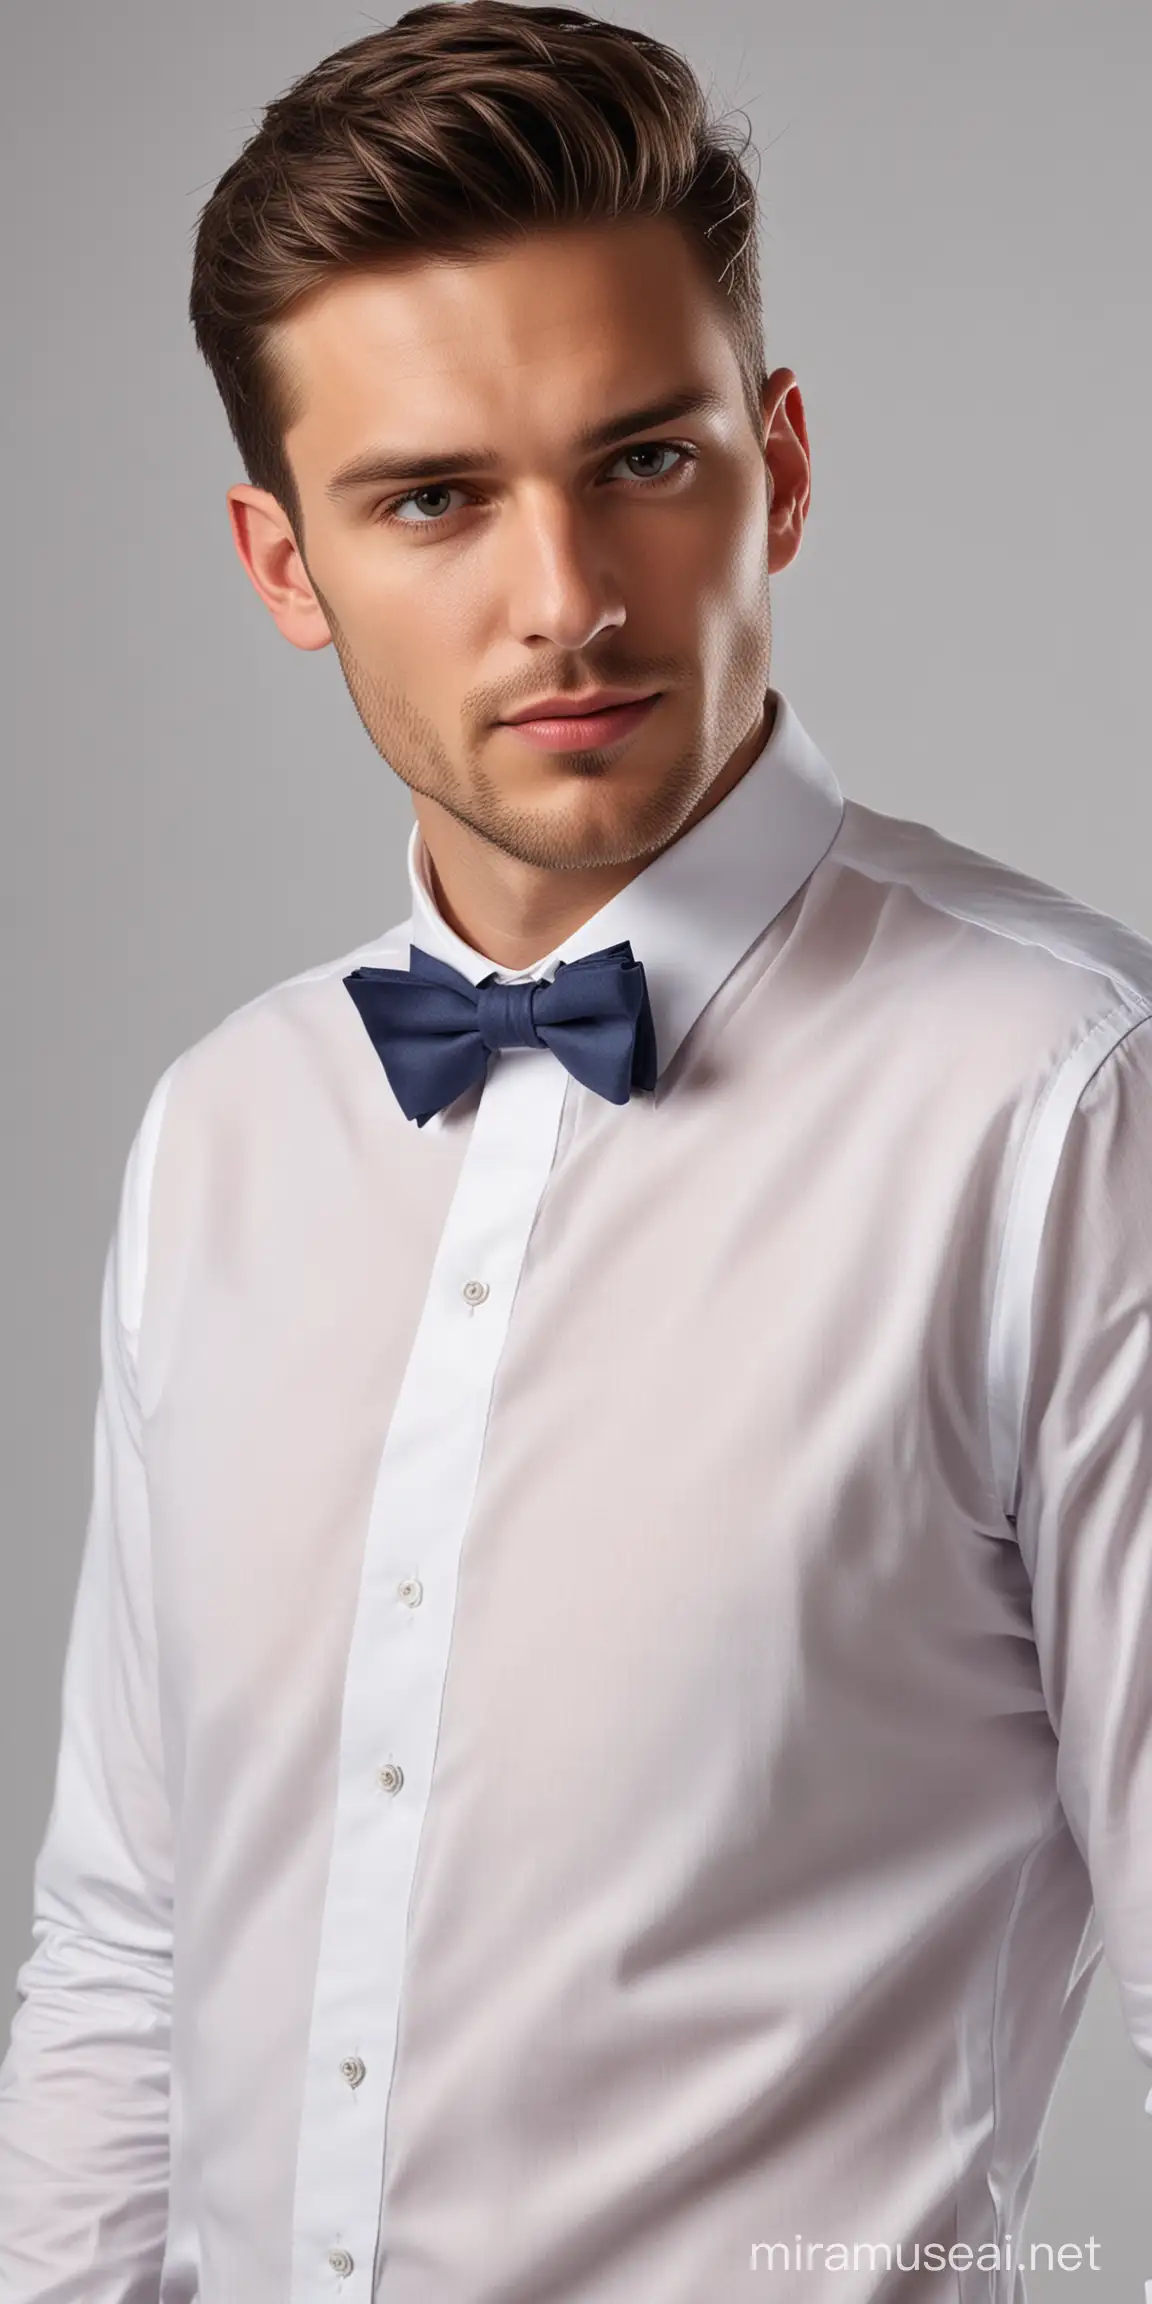 man model in studio with white shirt and  colour bow tie, make it realistic
